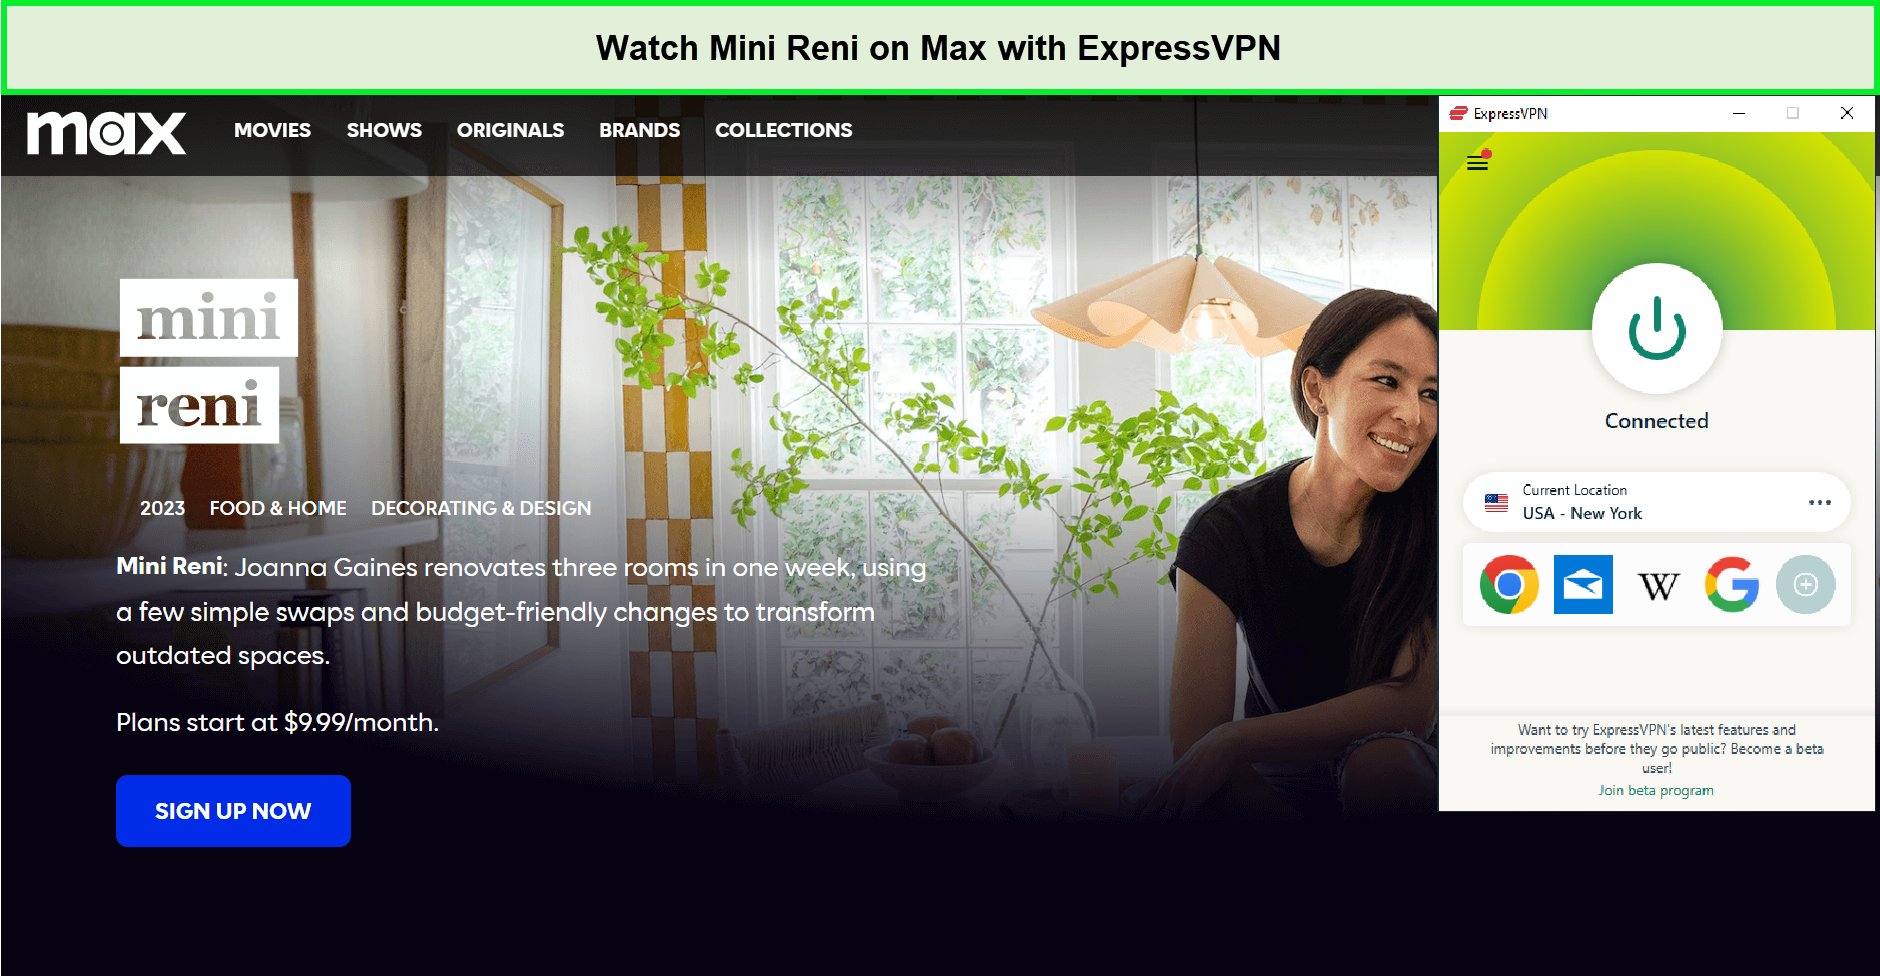 Watch-Mini-Reni-in-Singapore-on-Max-with-ExpressVPN